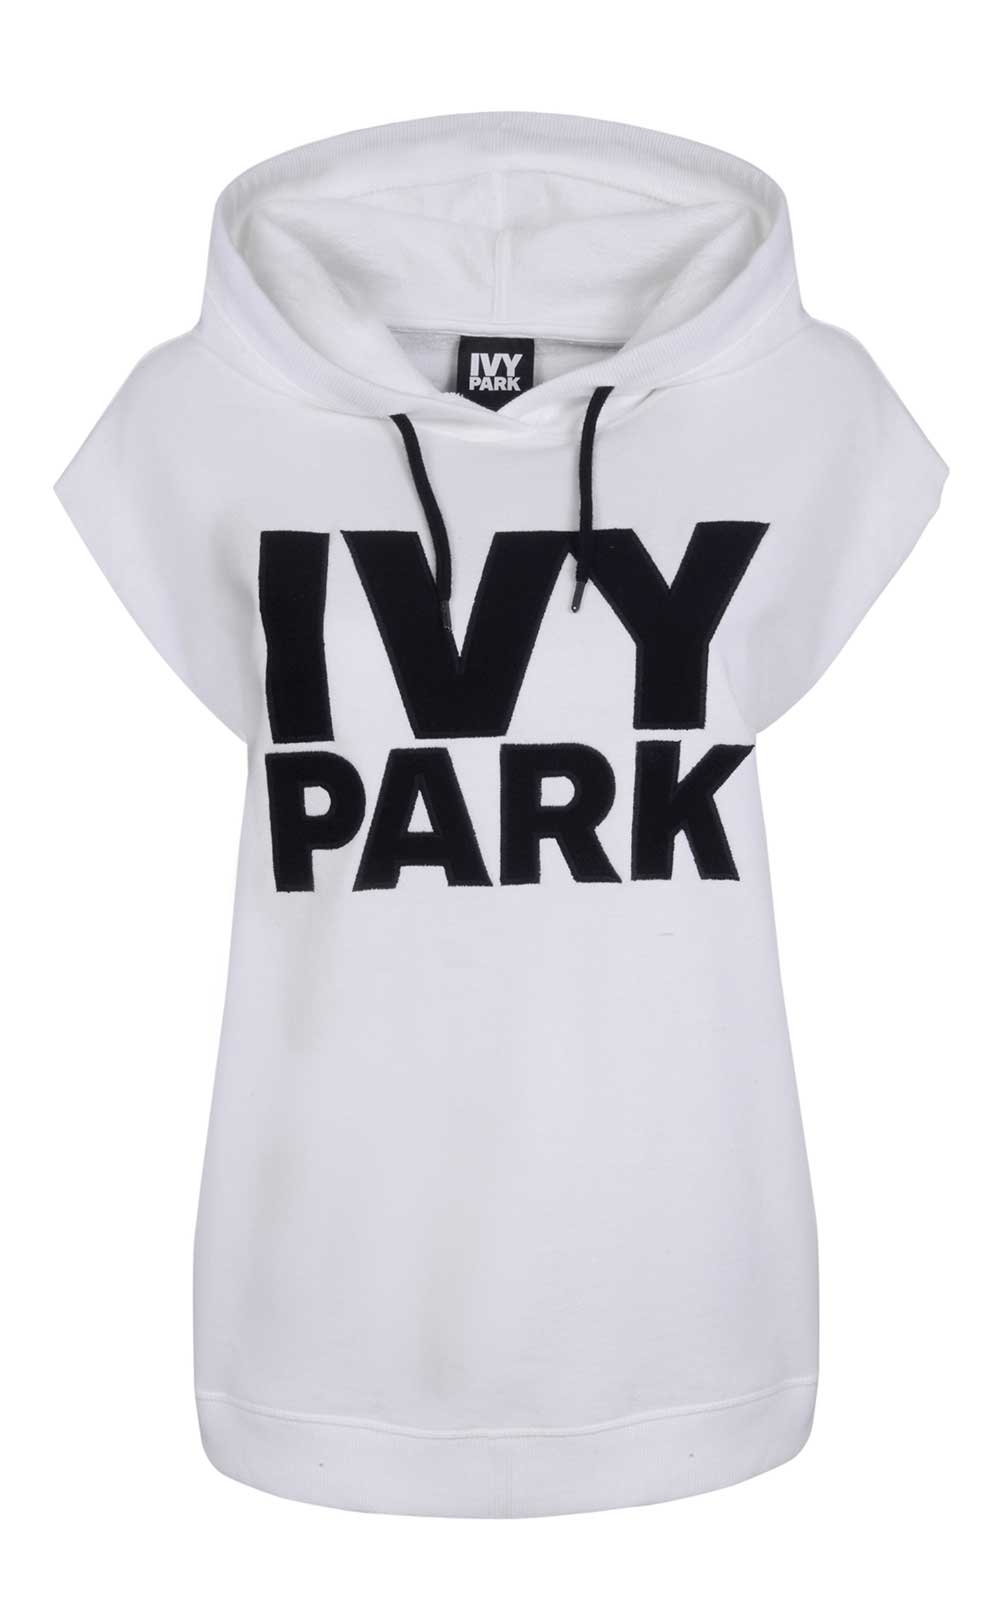 Sleeveless Oversized Logo Hoodie by Ivy Park, $80 from Topshop